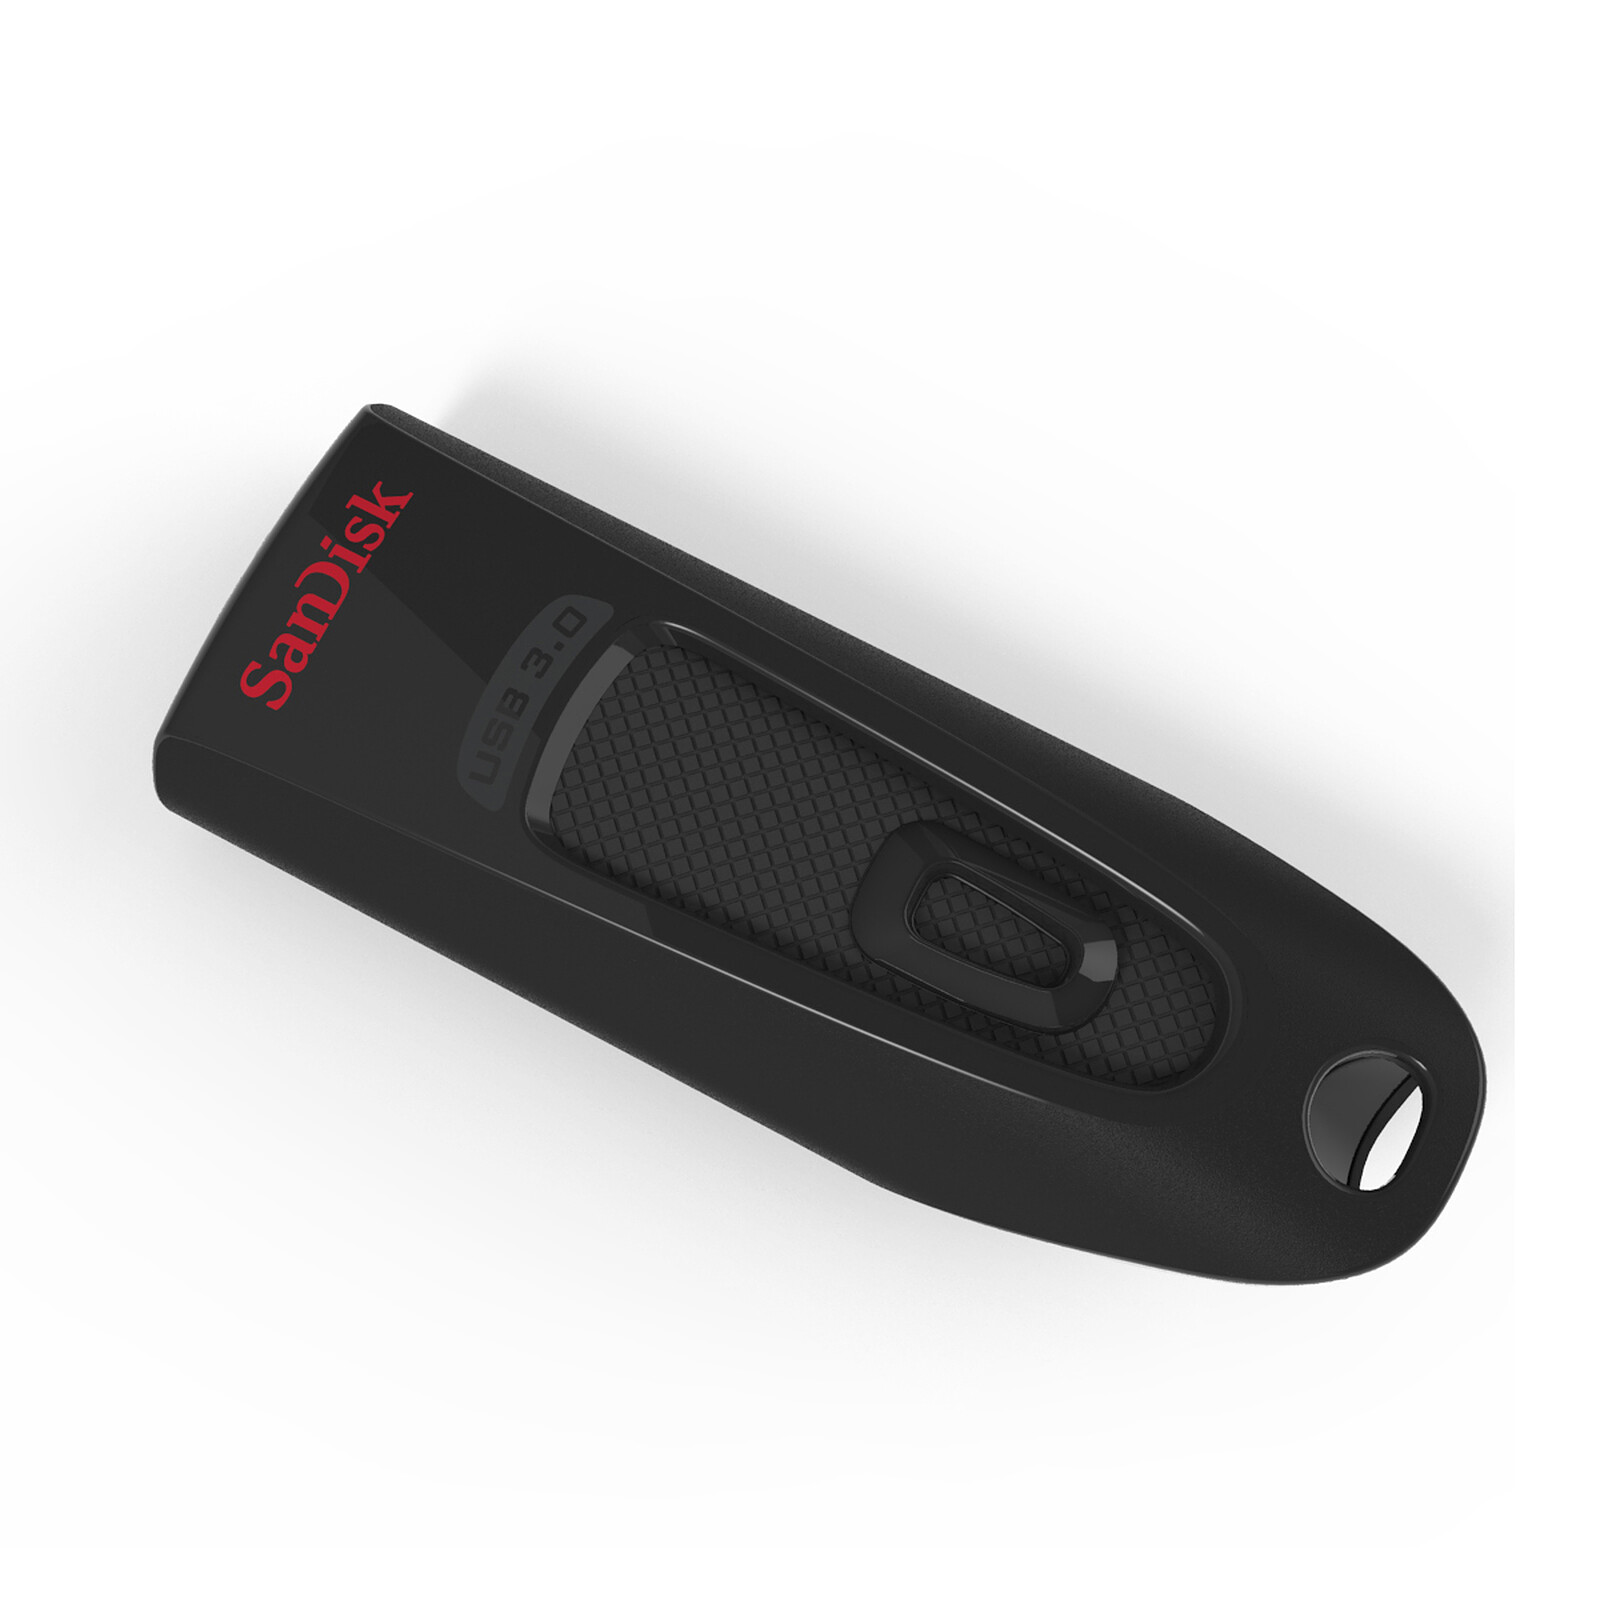 SanDisk Ultra Dual Drive Luxe USB-C 1 To - Clé USB - LDLC